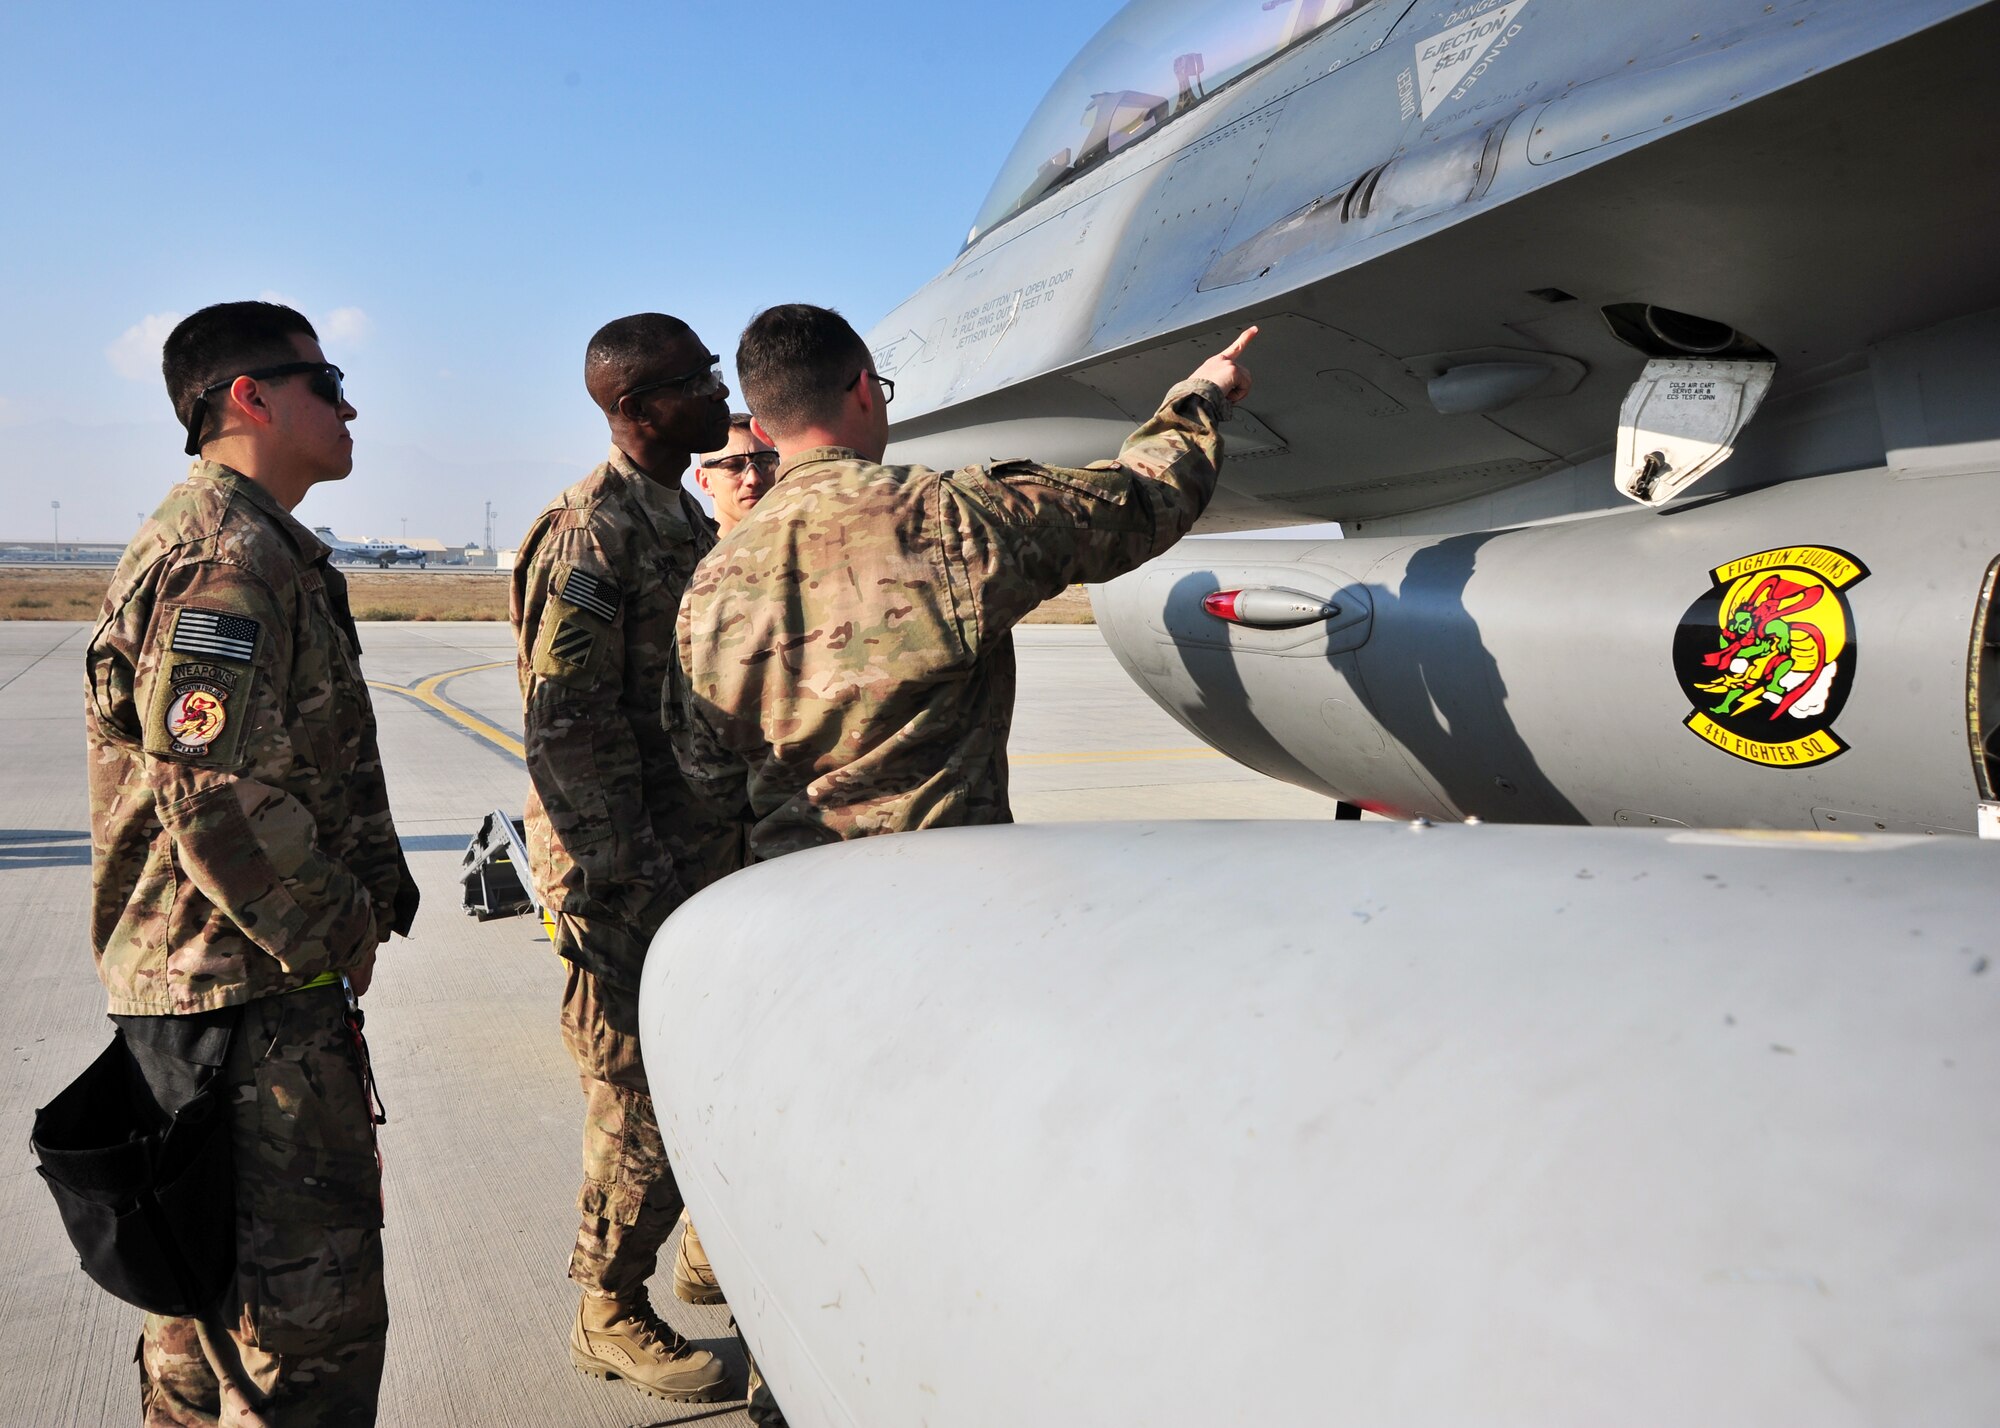 U.S. Air Force Senior Airman Andrew Freire, 455th Expeditionary Aircraft Maintenance Squadron weapons troop, briefs U.S. Army Command Sgt. Maj. Christopher Gilpin, Combined Joint Task Force 3 United States Forces Afghanistan, during a tour Jan. 6, 2015 at Bagram Airfield, Afghanistan. During the tour, Gilpin had the opportunity to meet with 455th Air Expeditionary Wing leadership and become better acquainted with Air Force assets and squadrons. (U.S. Air Force photo by Staff Sgt. Whitney Amstutz/released)